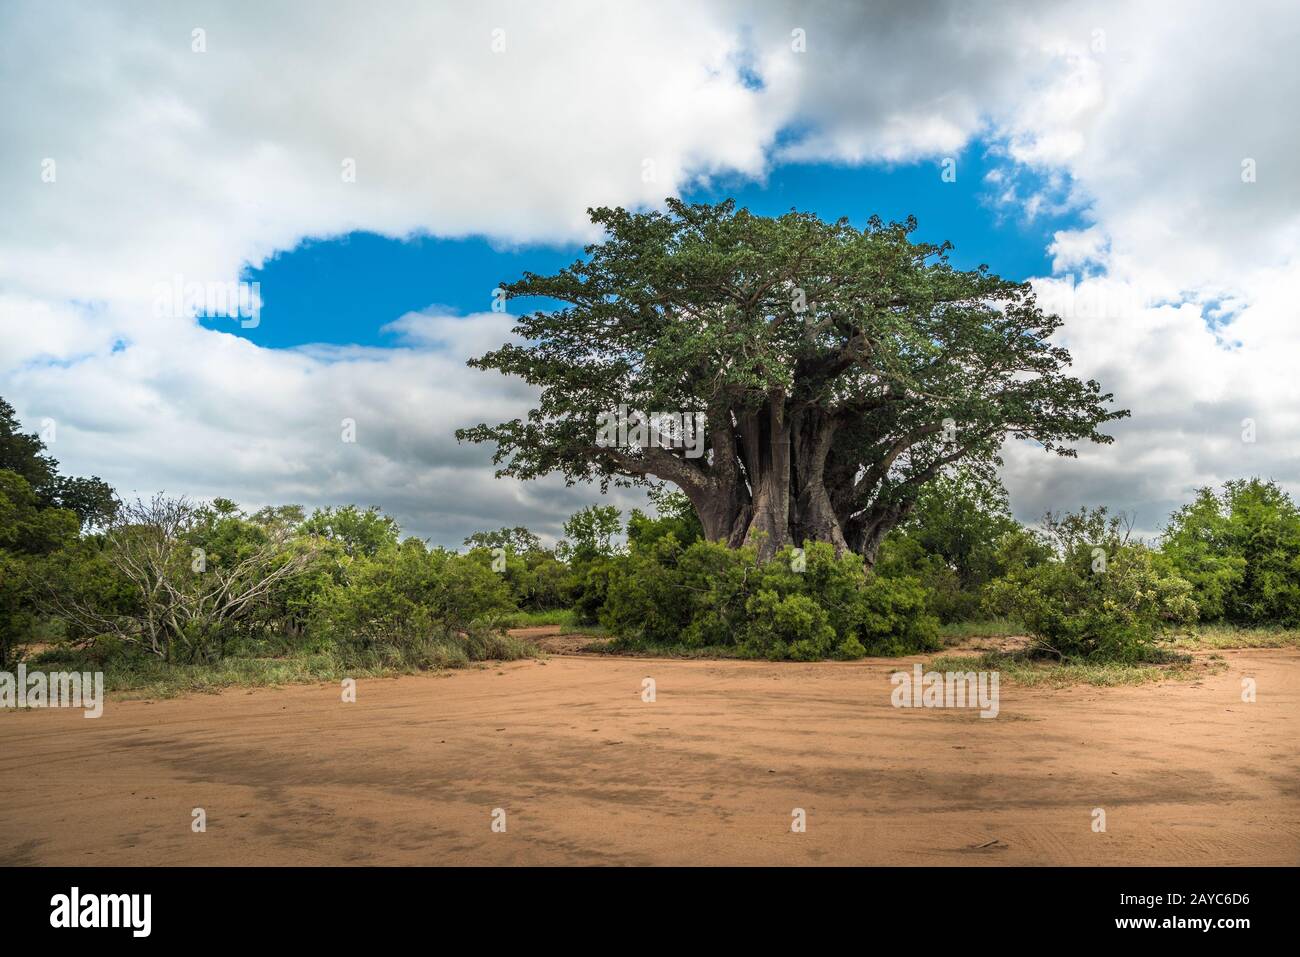 Big baobab tree in the Kruger National Park, South Africa Stock Photo